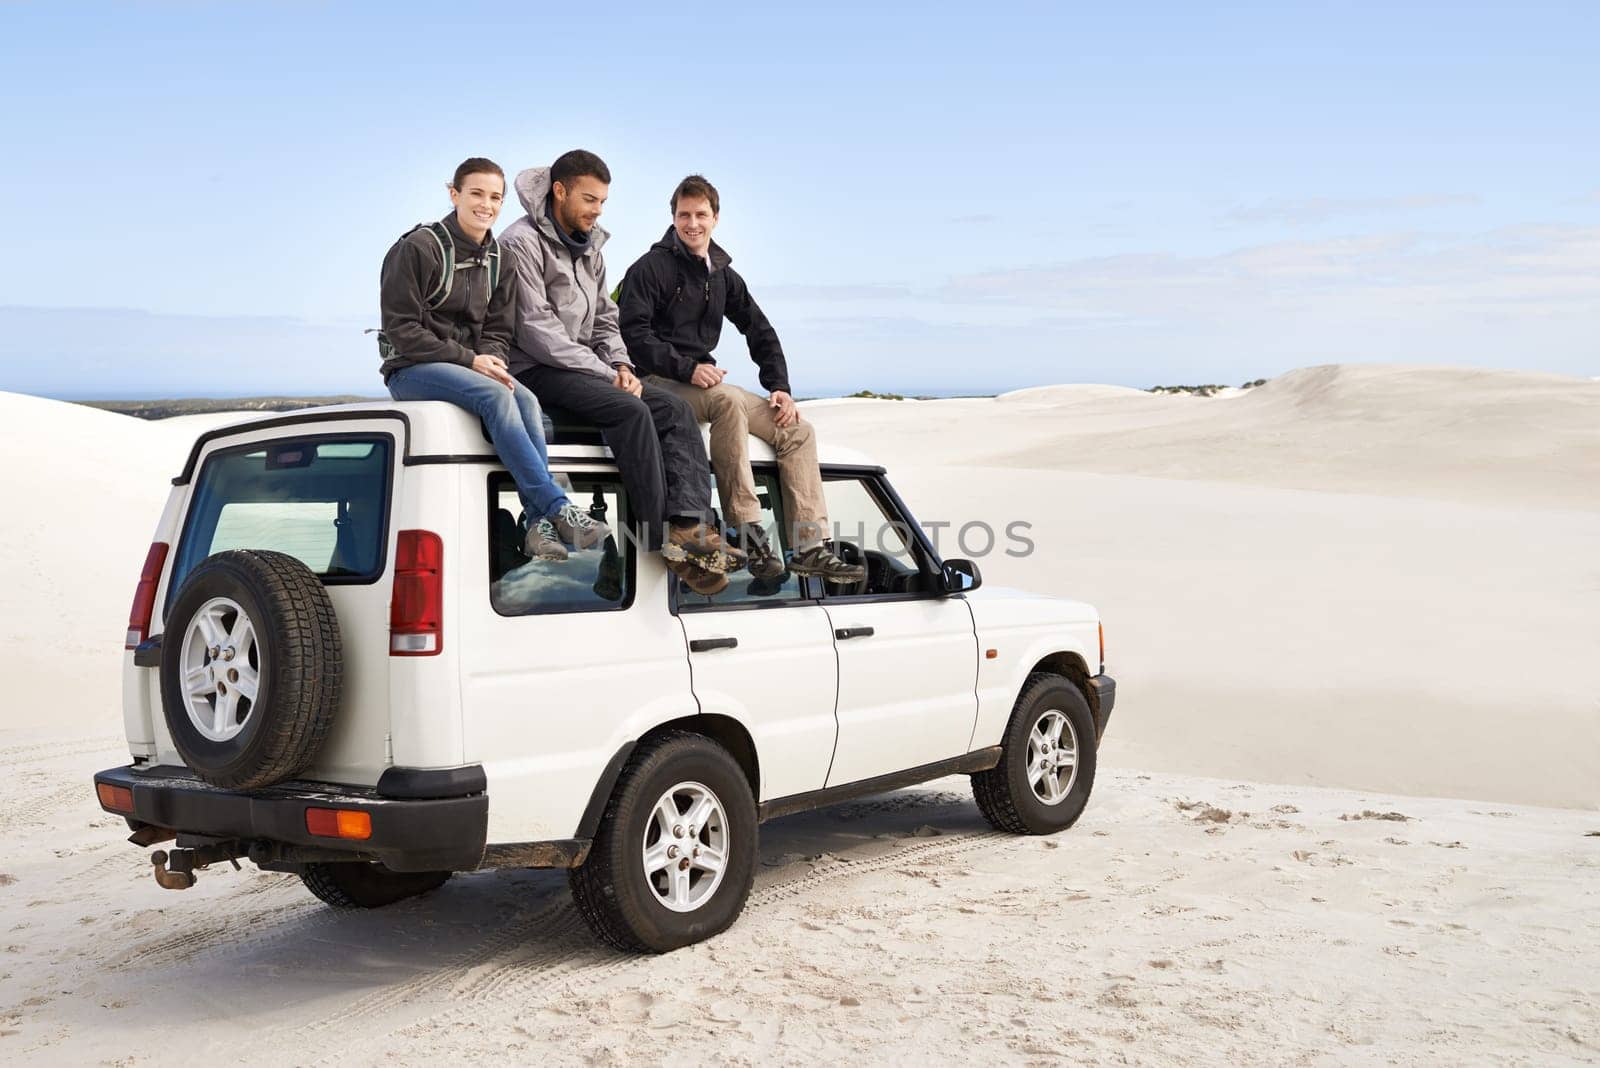 Car, adventure and friends sitting on roof for road trip break, travel and off road drive in sand dune. Relax, transportation and people in nature for getaway, summer vacation and journey in Mexico by YuriArcurs